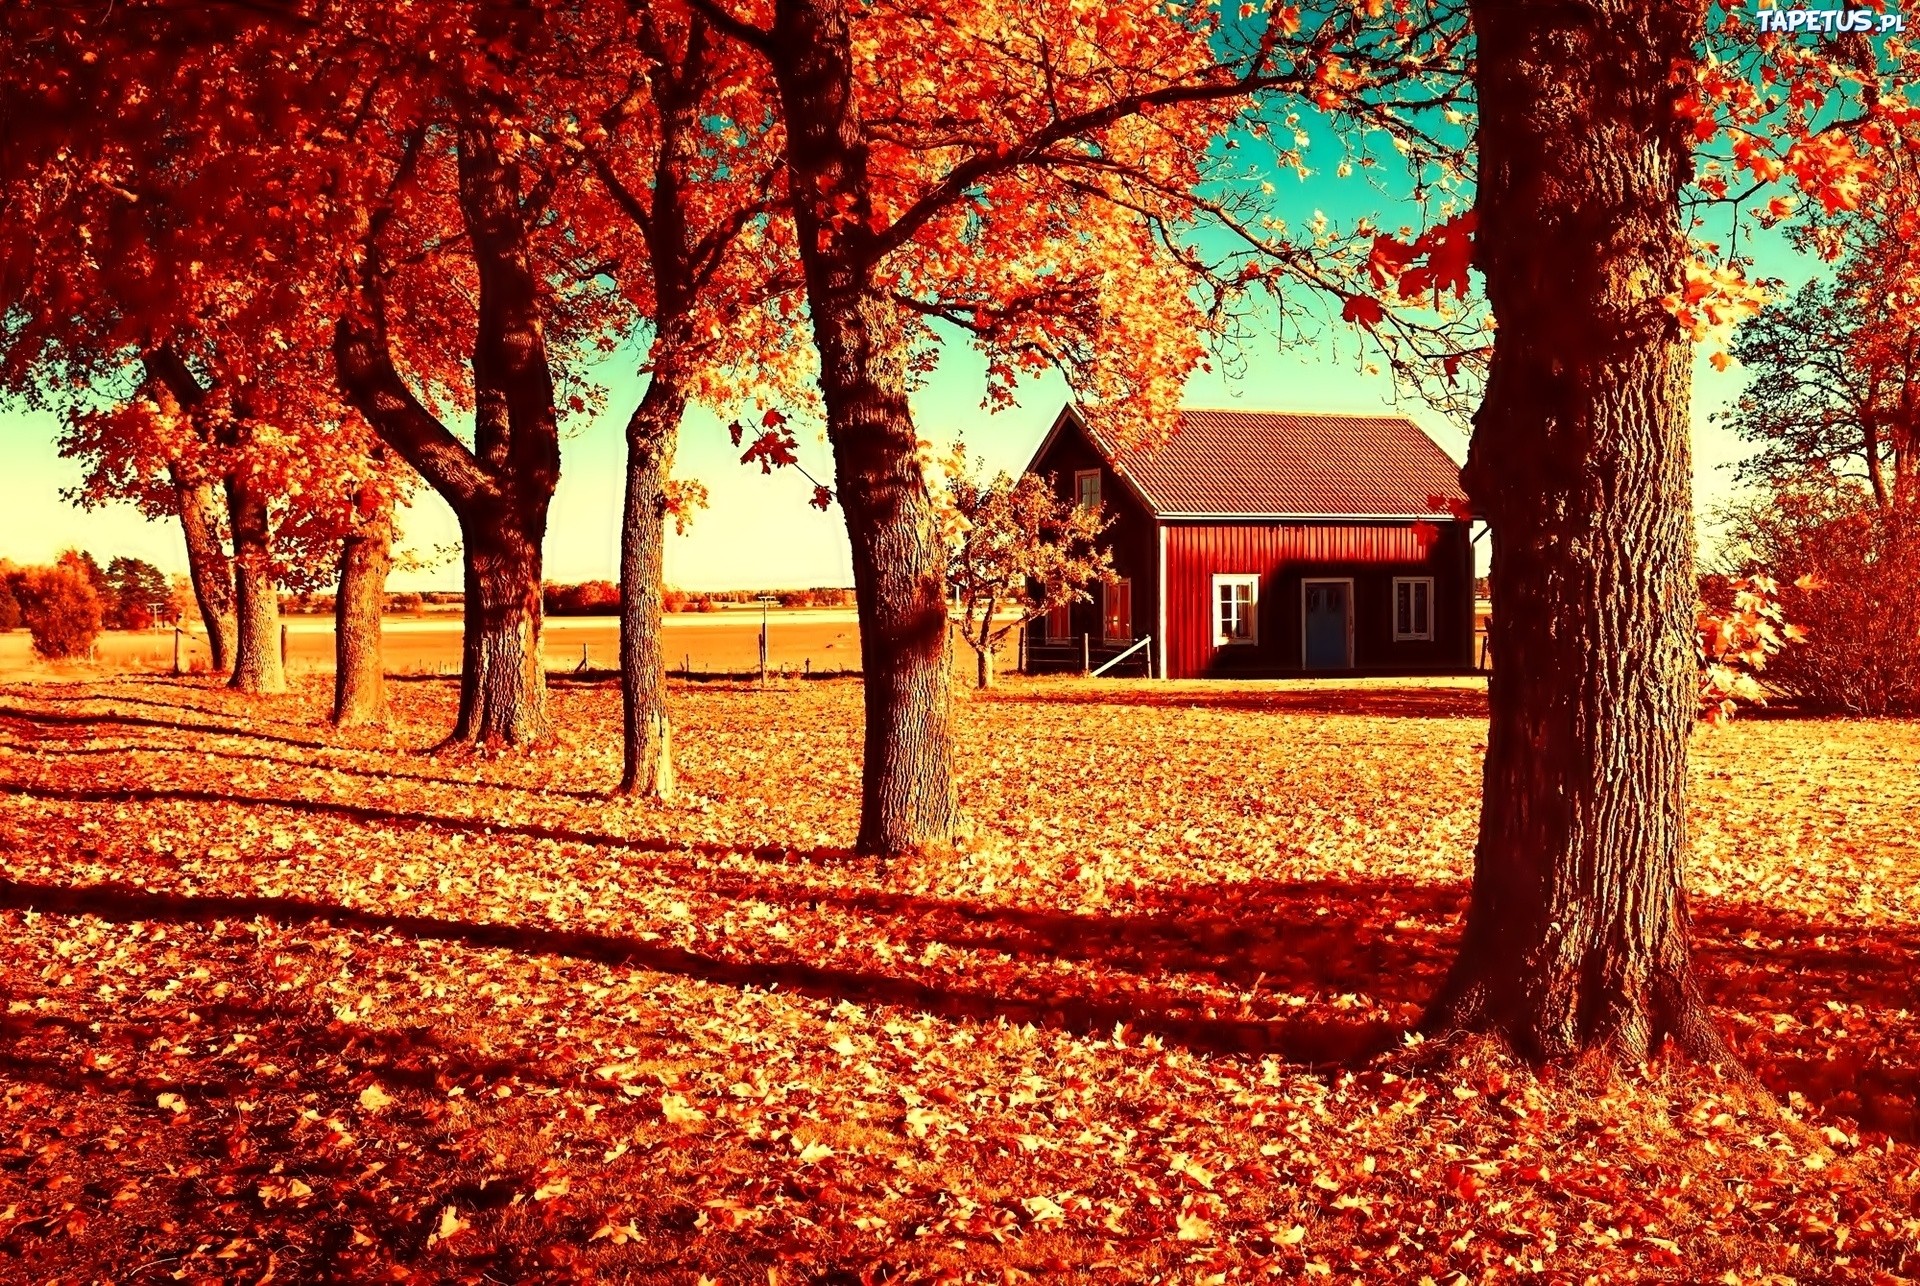 General 1920x1286 village landscape trees fall red red leaves house rural fallen leaves daylight idyllic